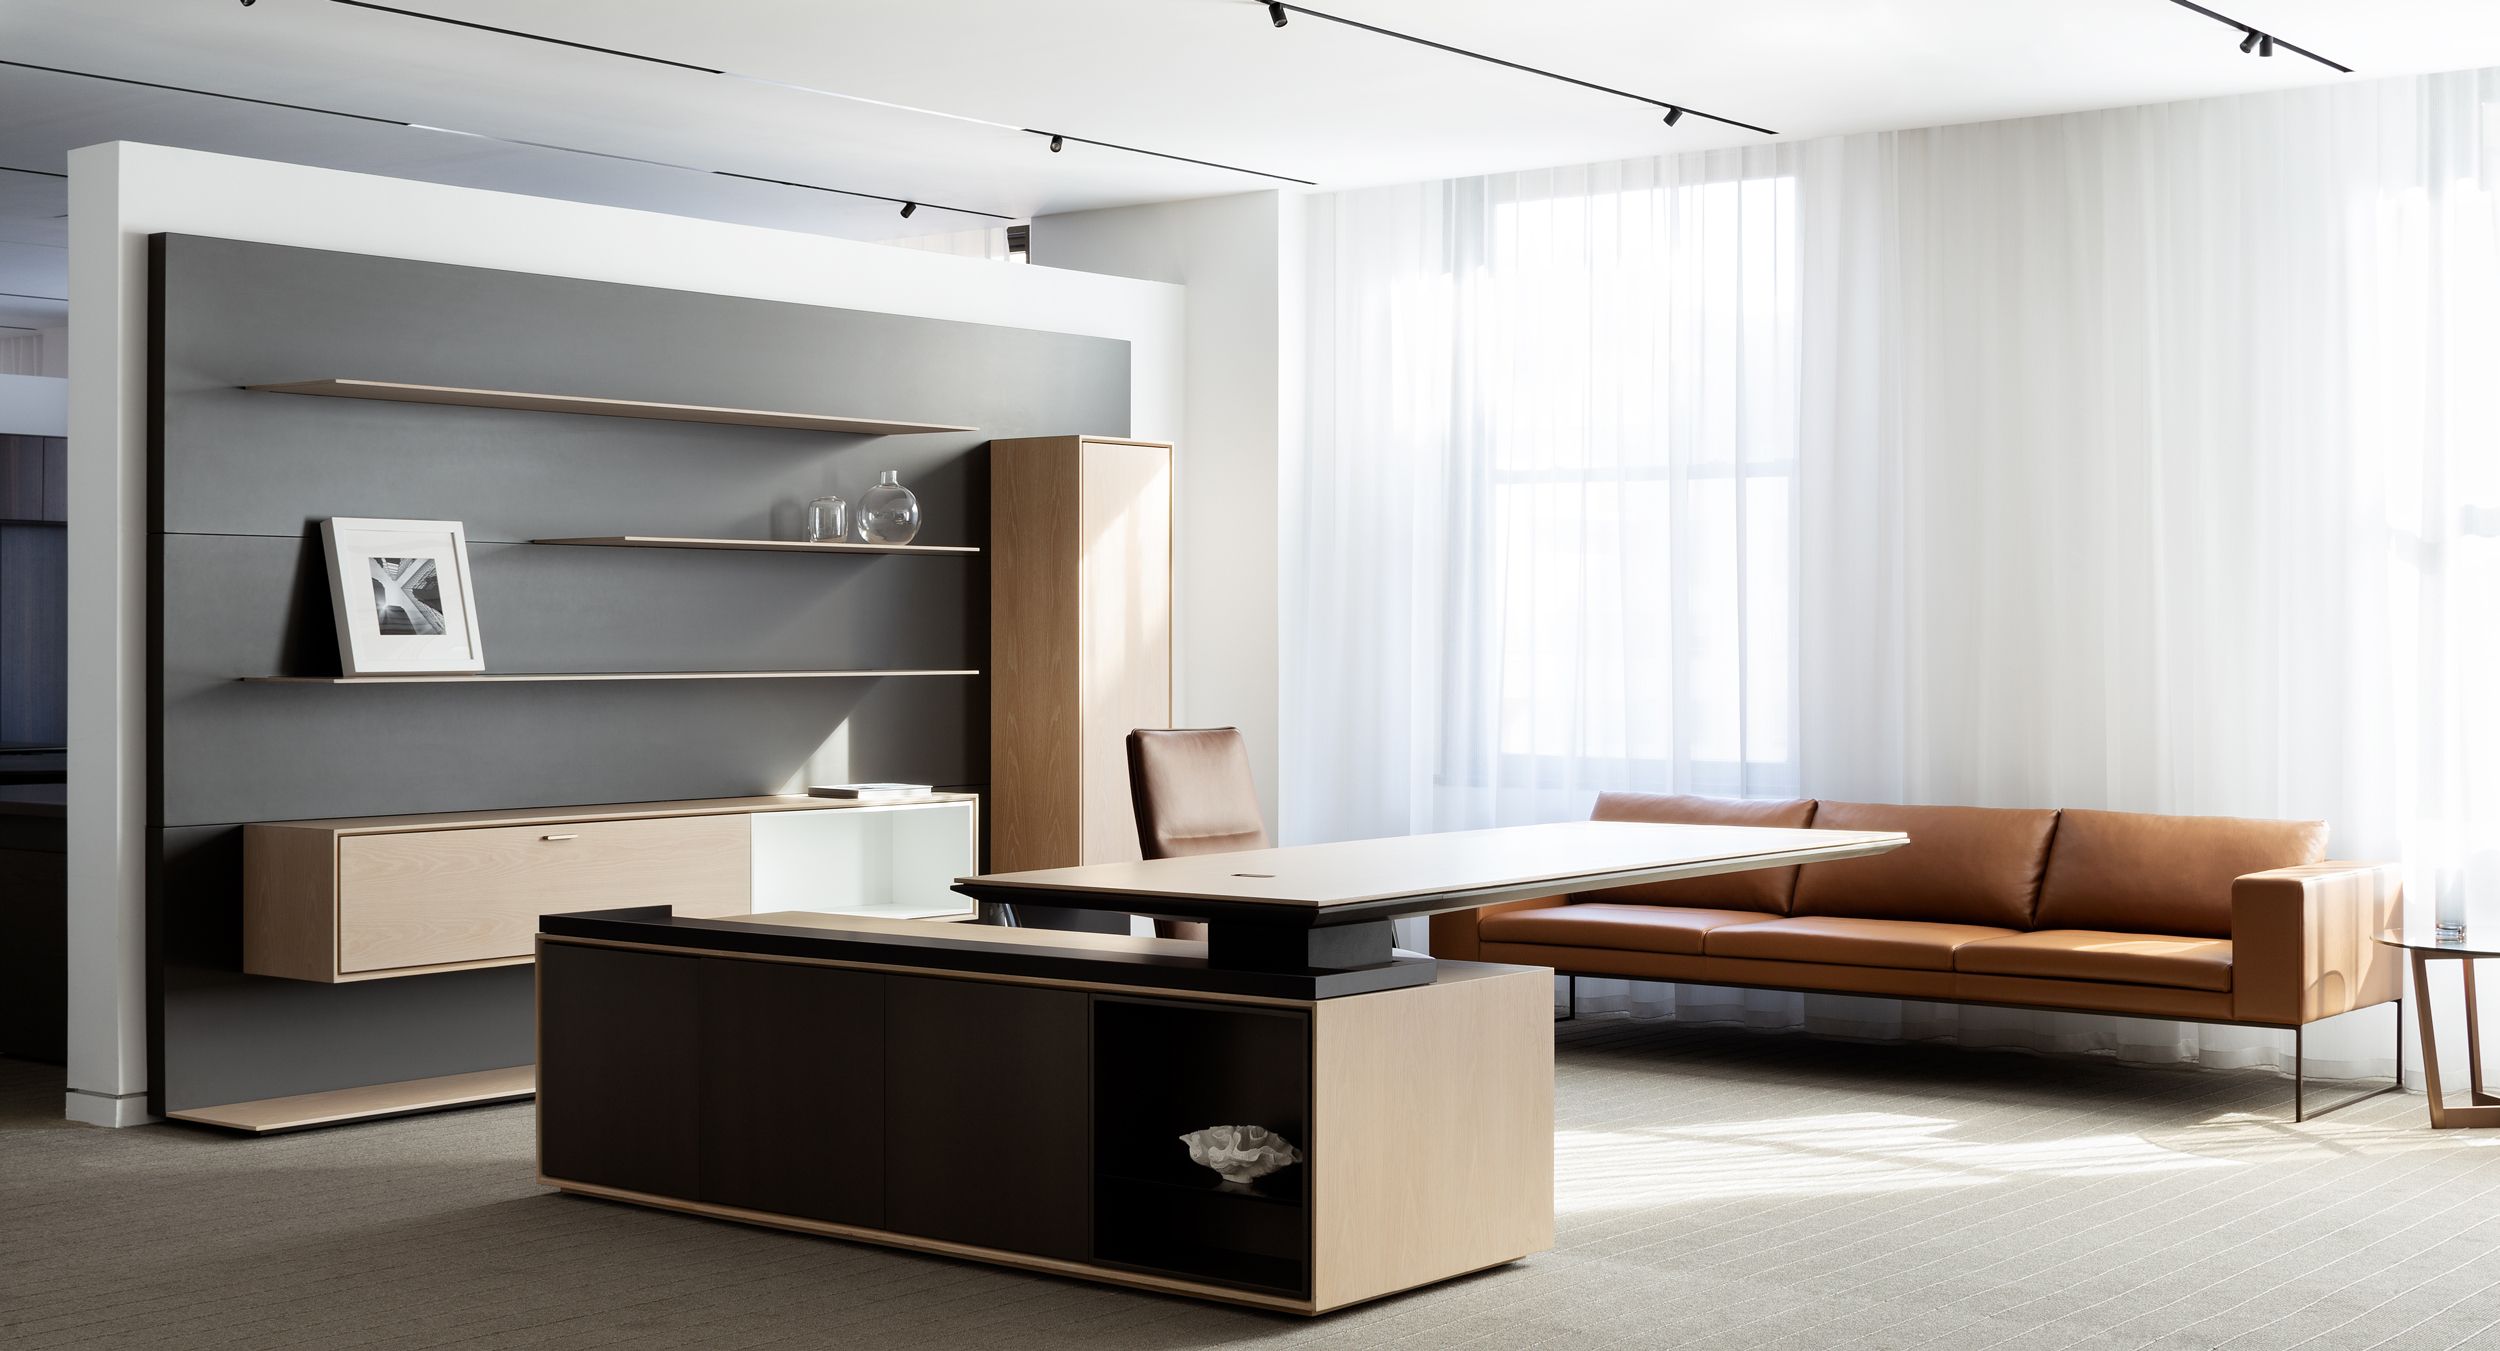 Halo private offices set the standard for executive design and functionality.